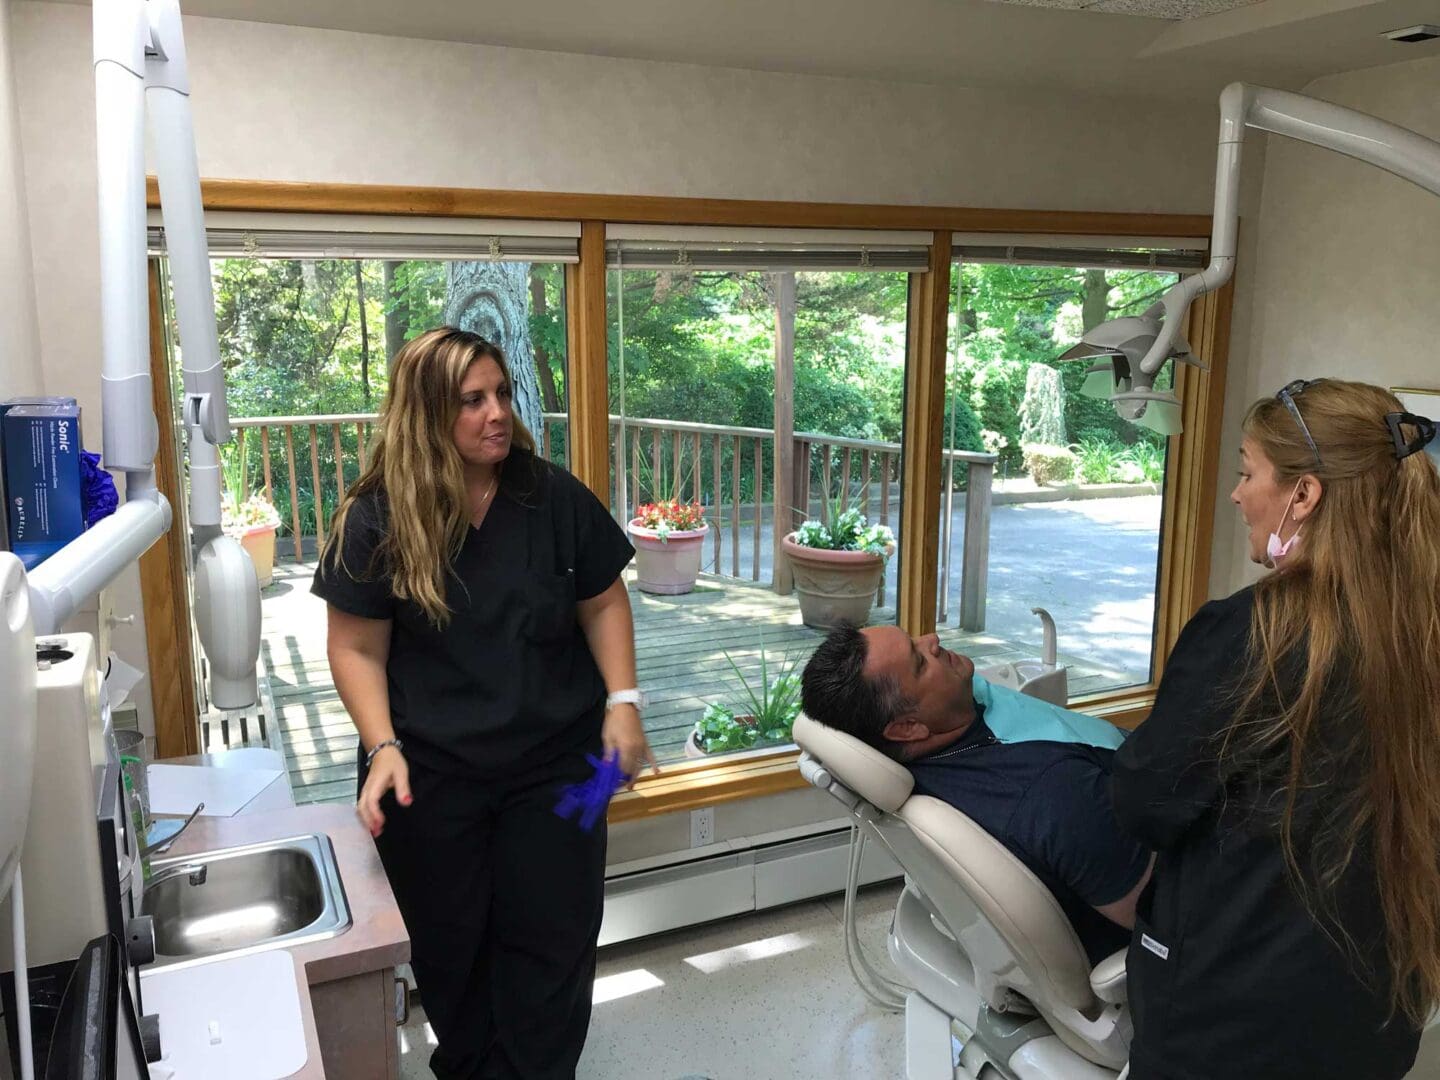 A dentist and his assistant are standing in front of the patient.